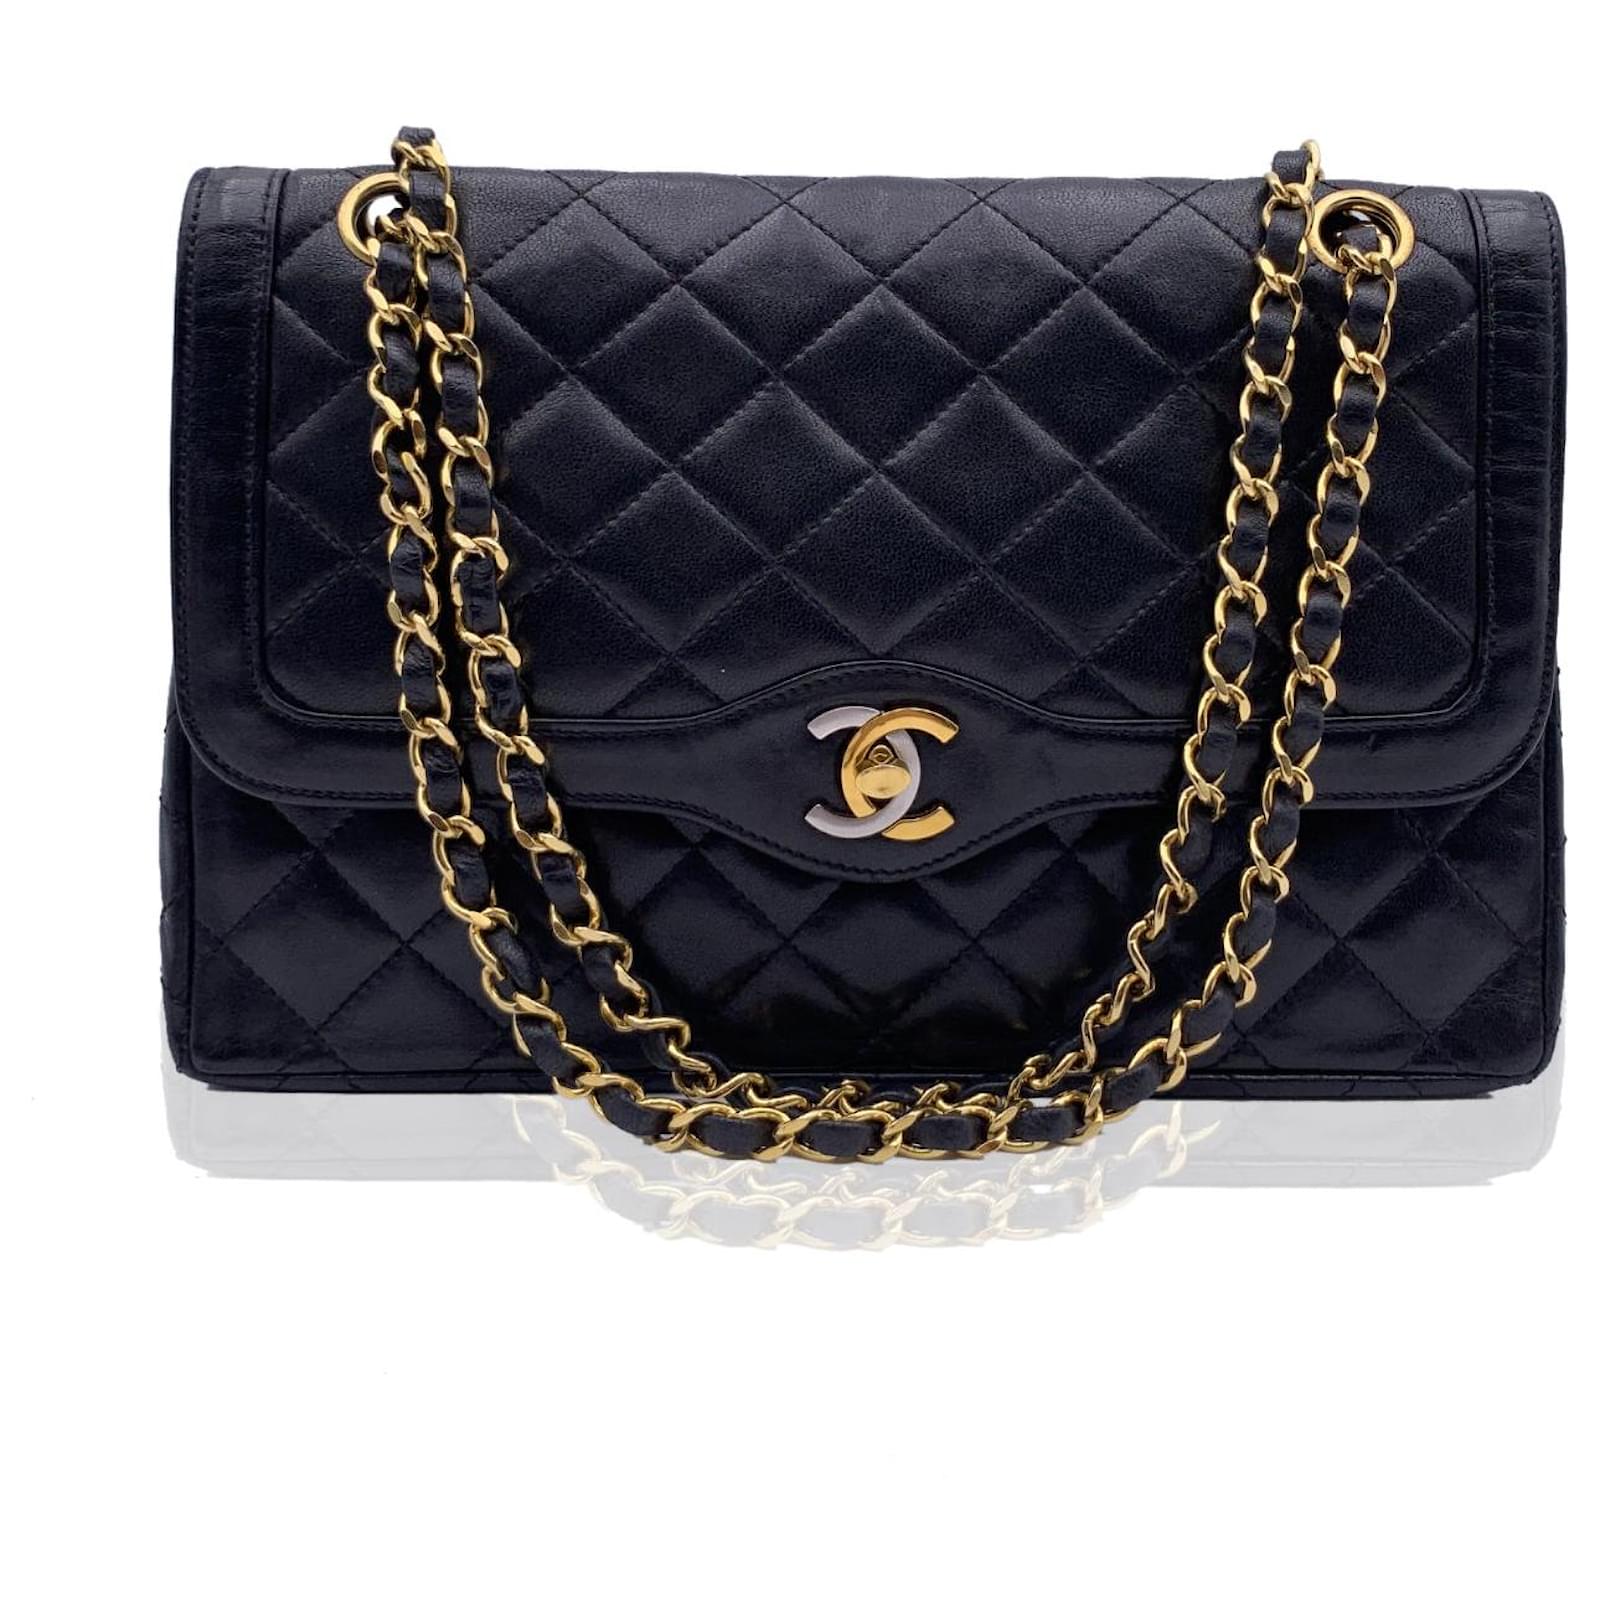 Chanel Vintage Quilted Leather Timeless Smooth Trim lined Flap Bag